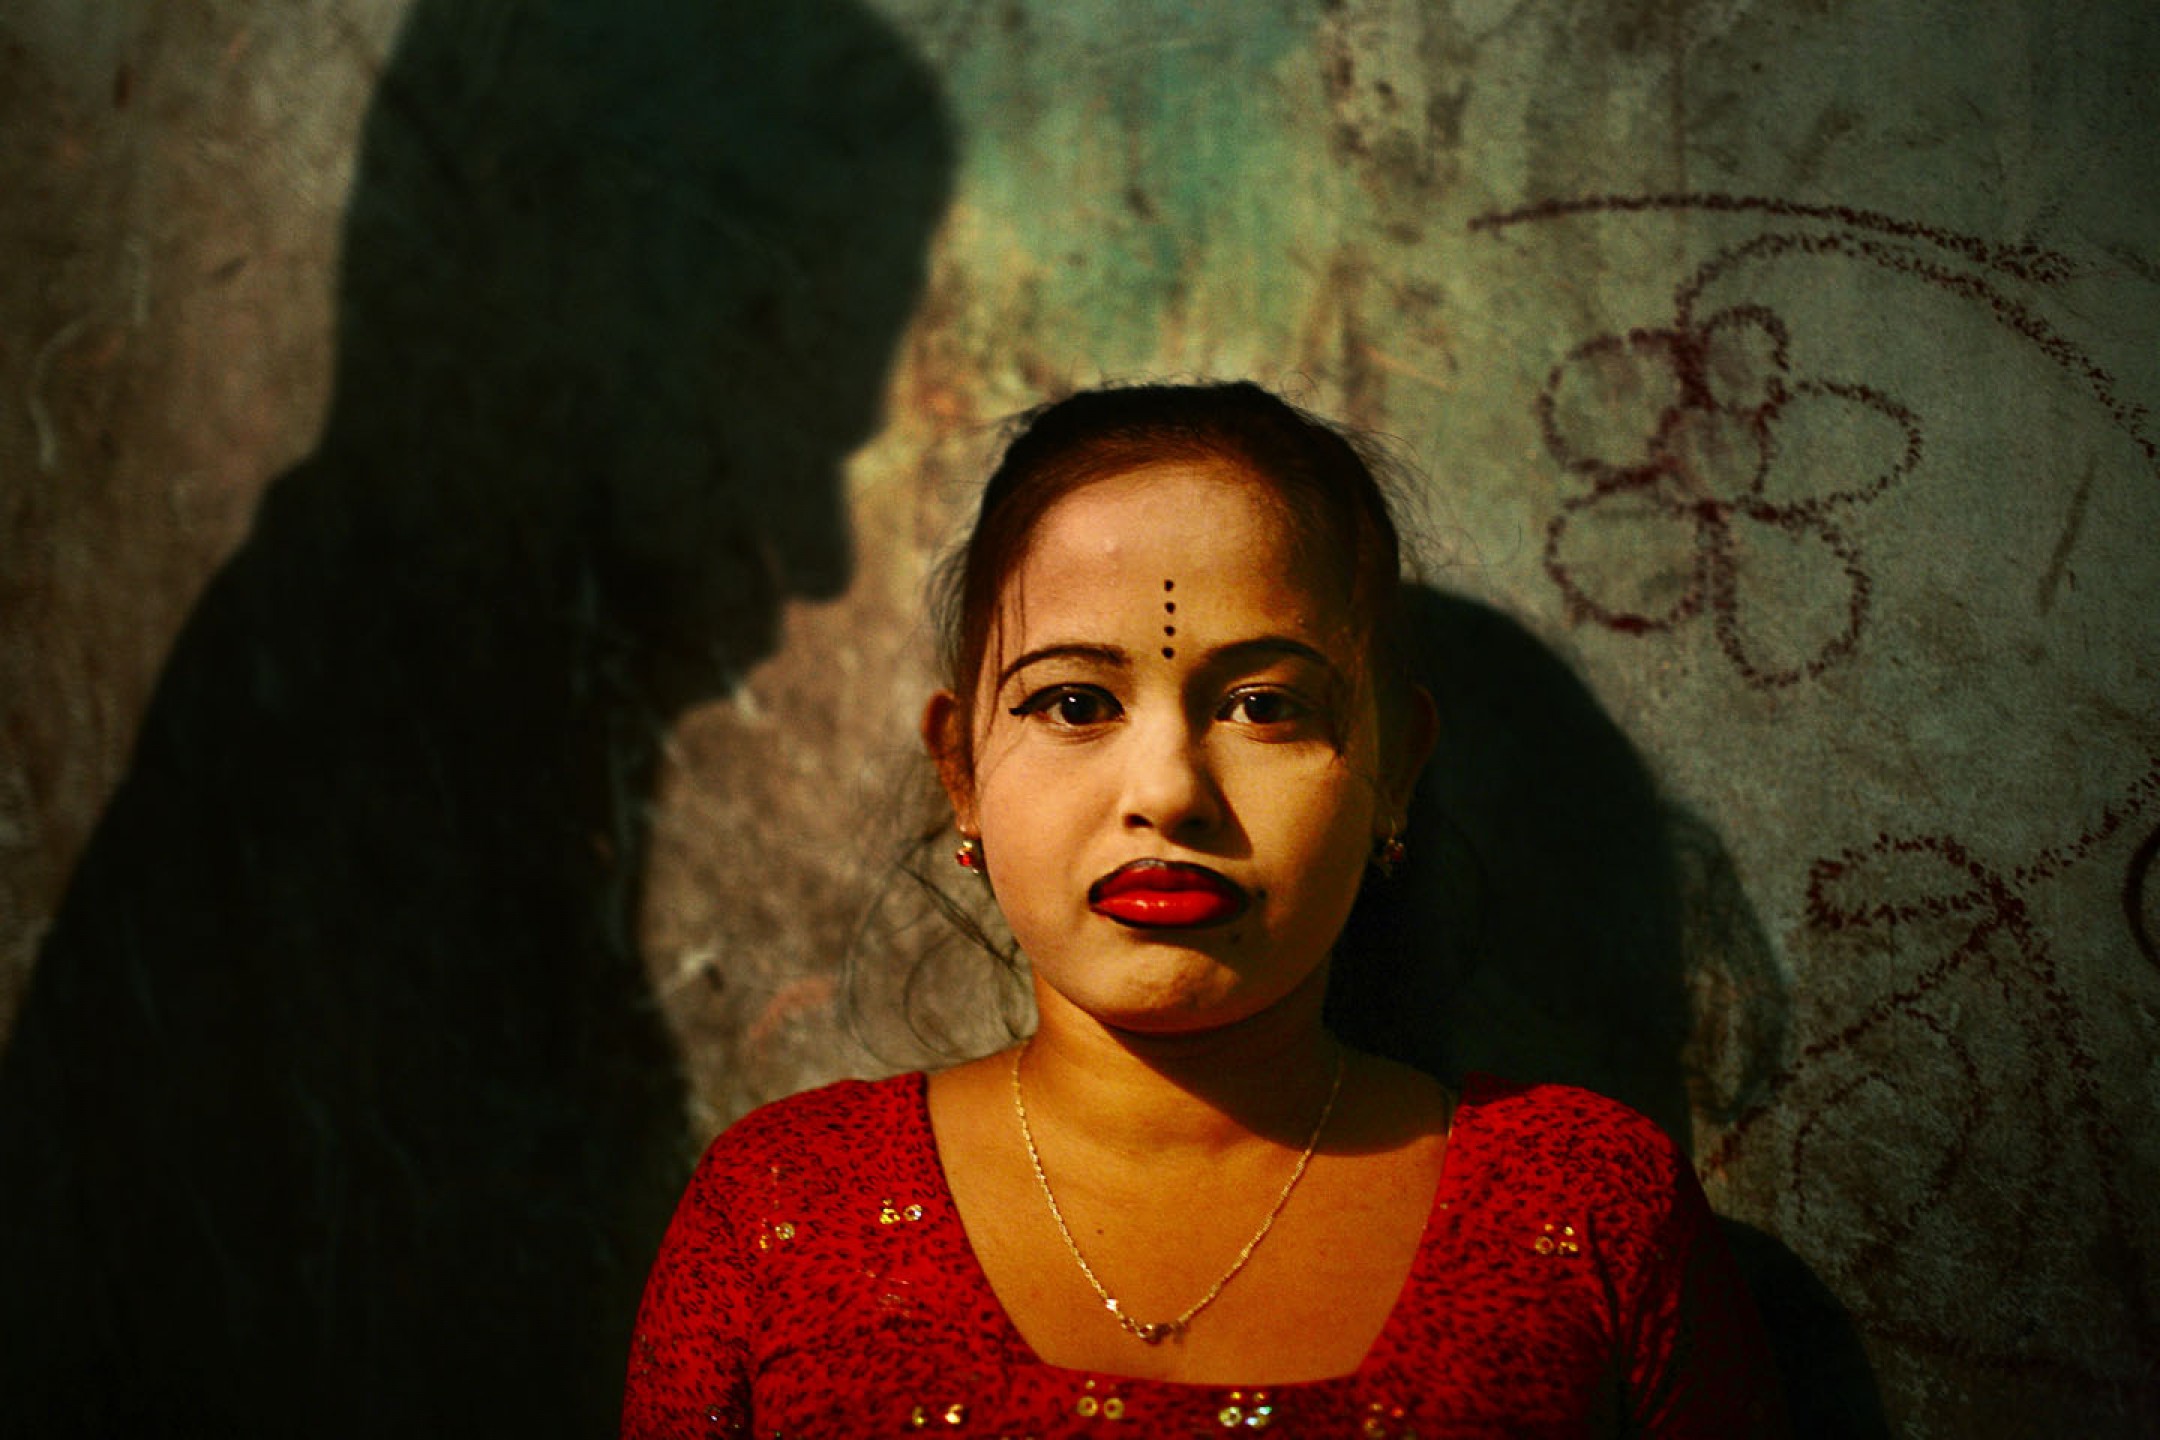 Sex workers in Bangladesh